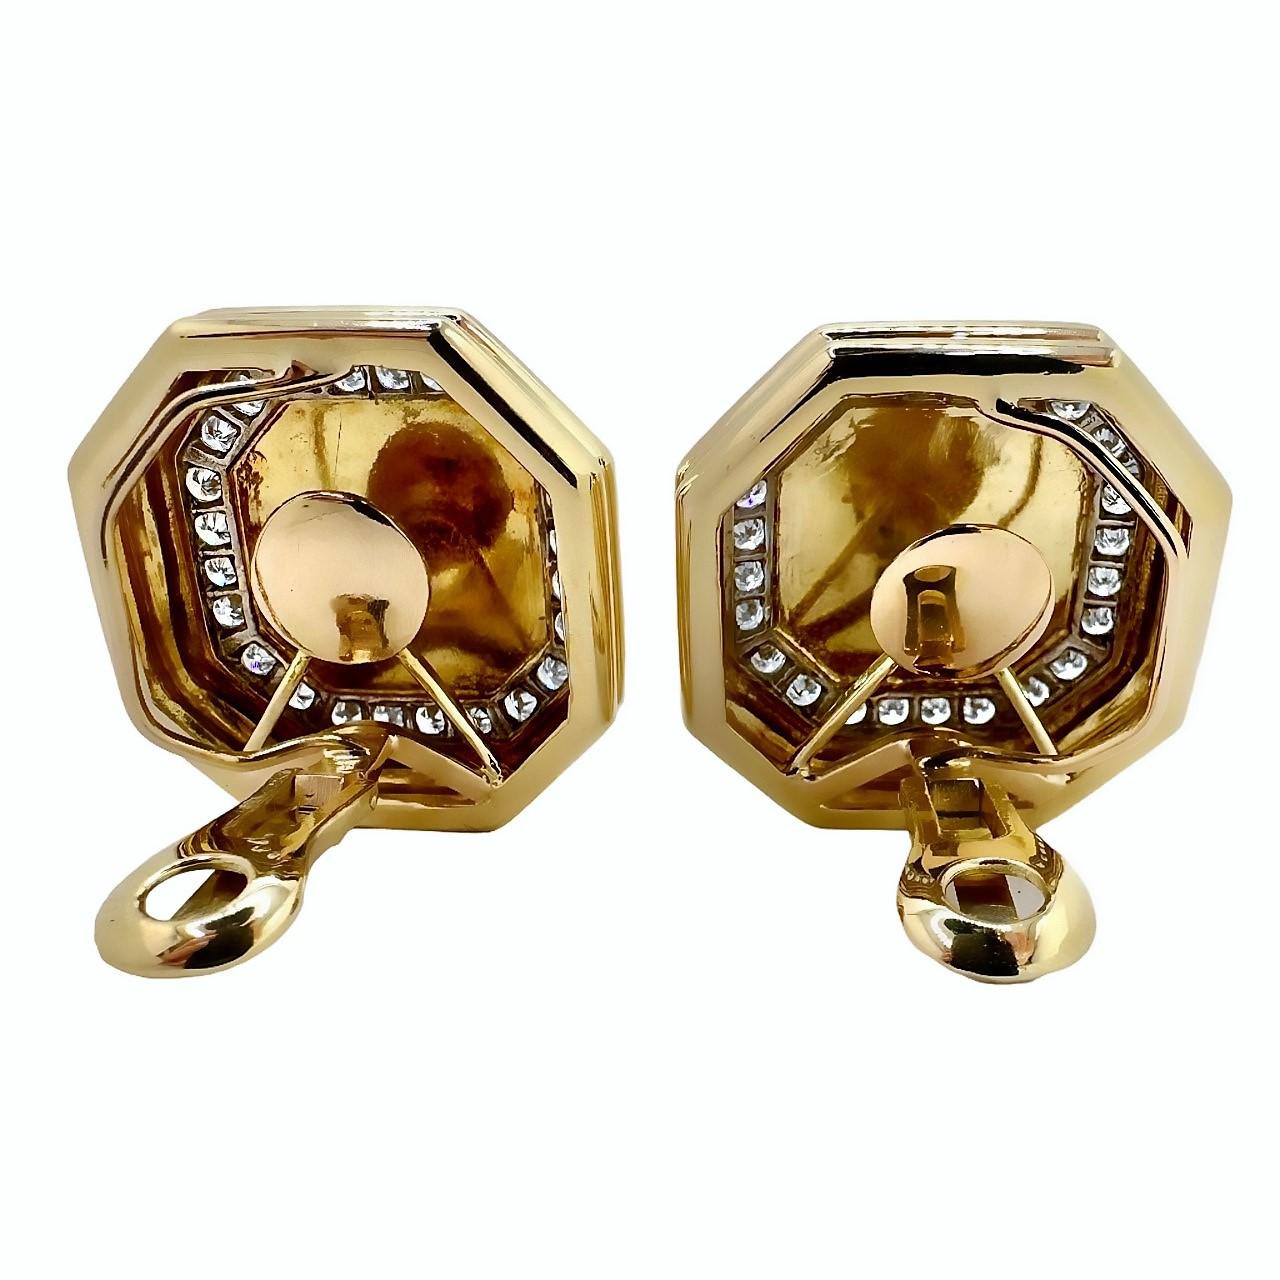 Brilliant Cut Grand Scale Earrings in Gold, Platinum, Mabe Pearl, & Diamonds by Wander, France For Sale